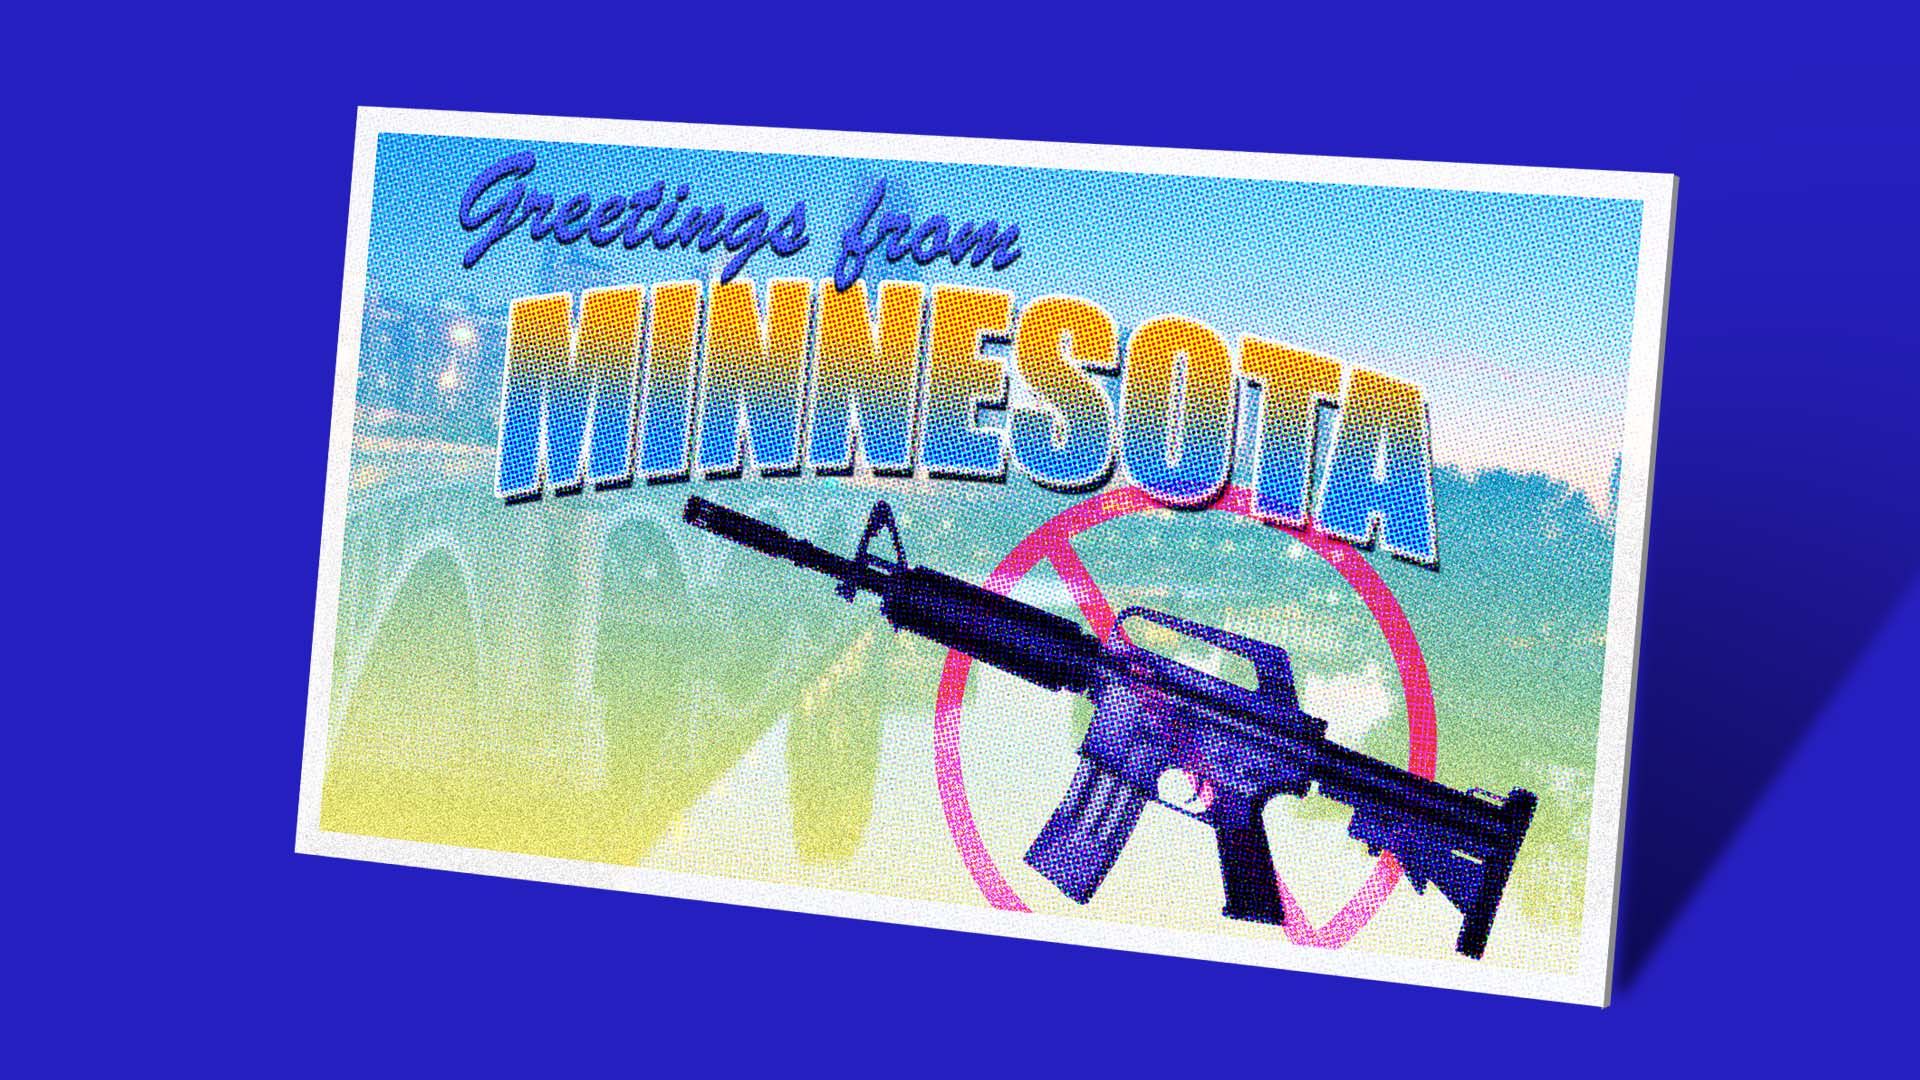 Illustration of a "greetings from Minnesota" postcard with a crossed out assault rifle on it